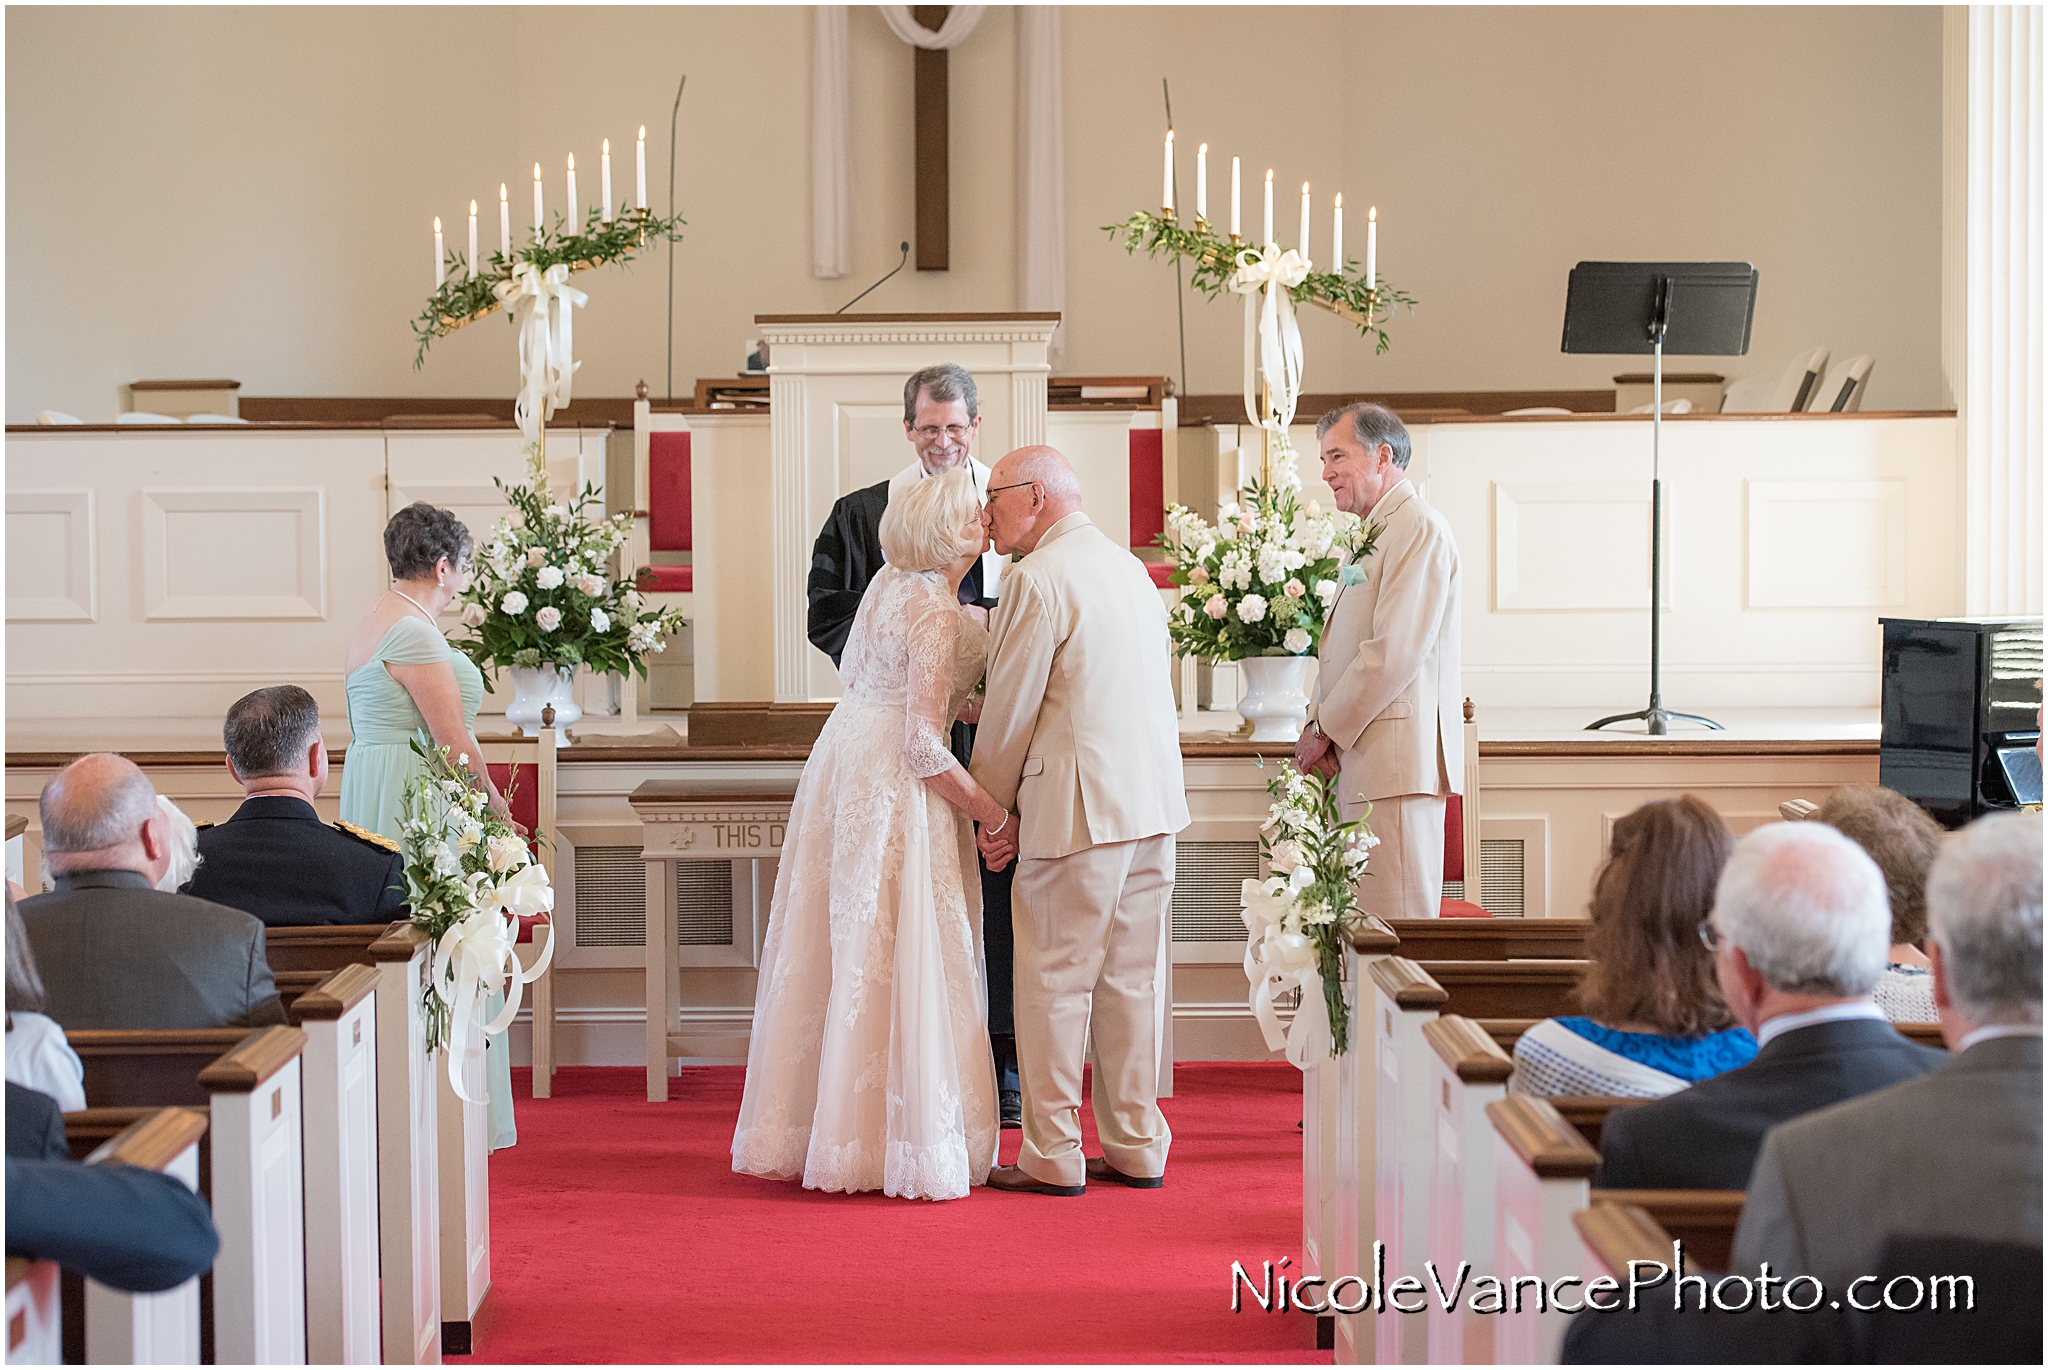 The first kiss during the wedding ceremony at Crestwood Presbyterian Church in Richmond VA